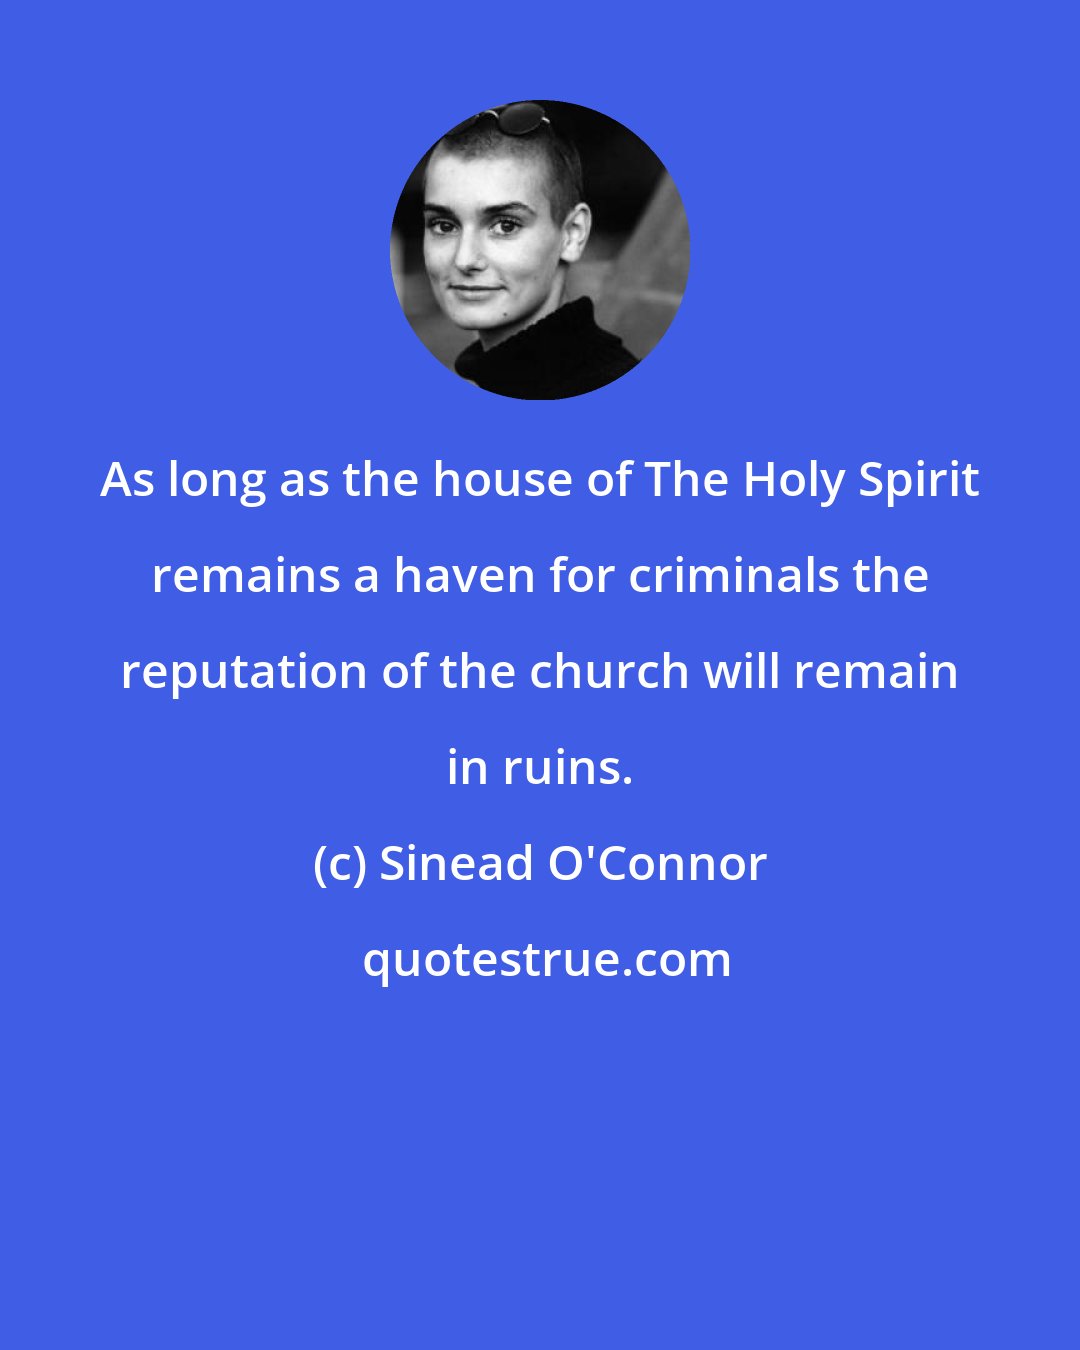 Sinead O'Connor: As long as the house of The Holy Spirit remains a haven for criminals the reputation of the church will remain in ruins.